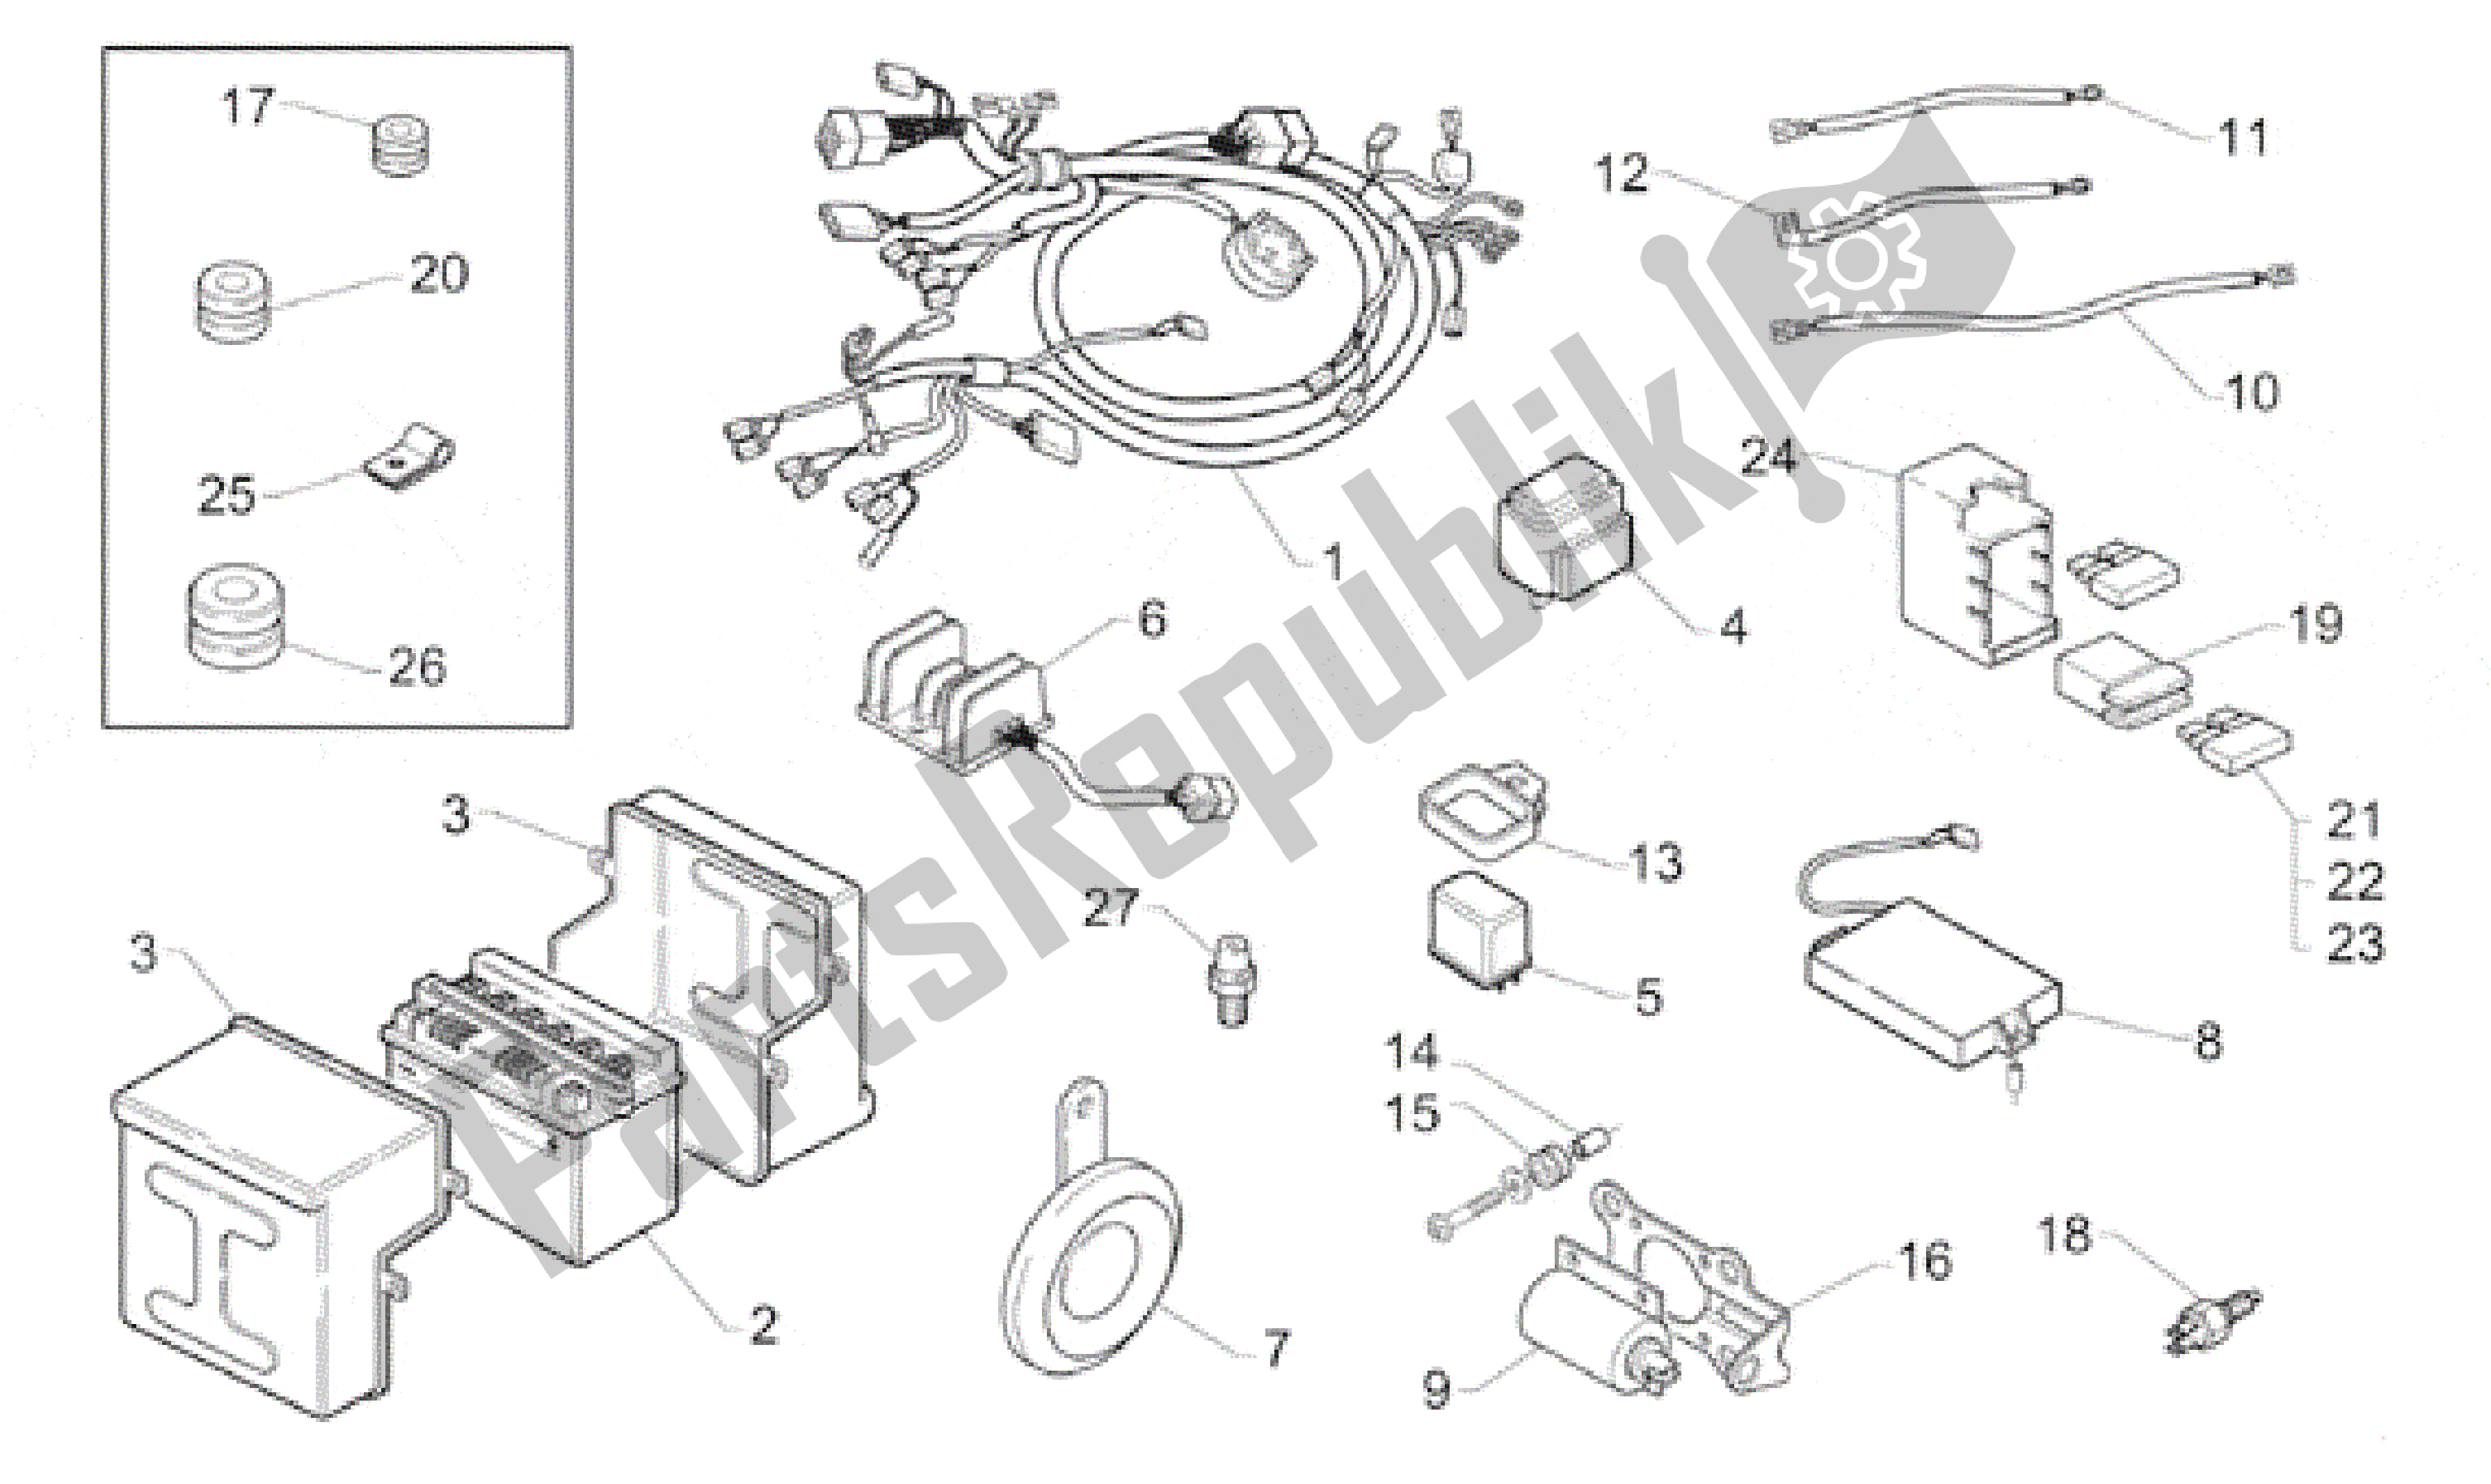 All parts for the Electrical System of the Aprilia Classic 125 1995 - 1999